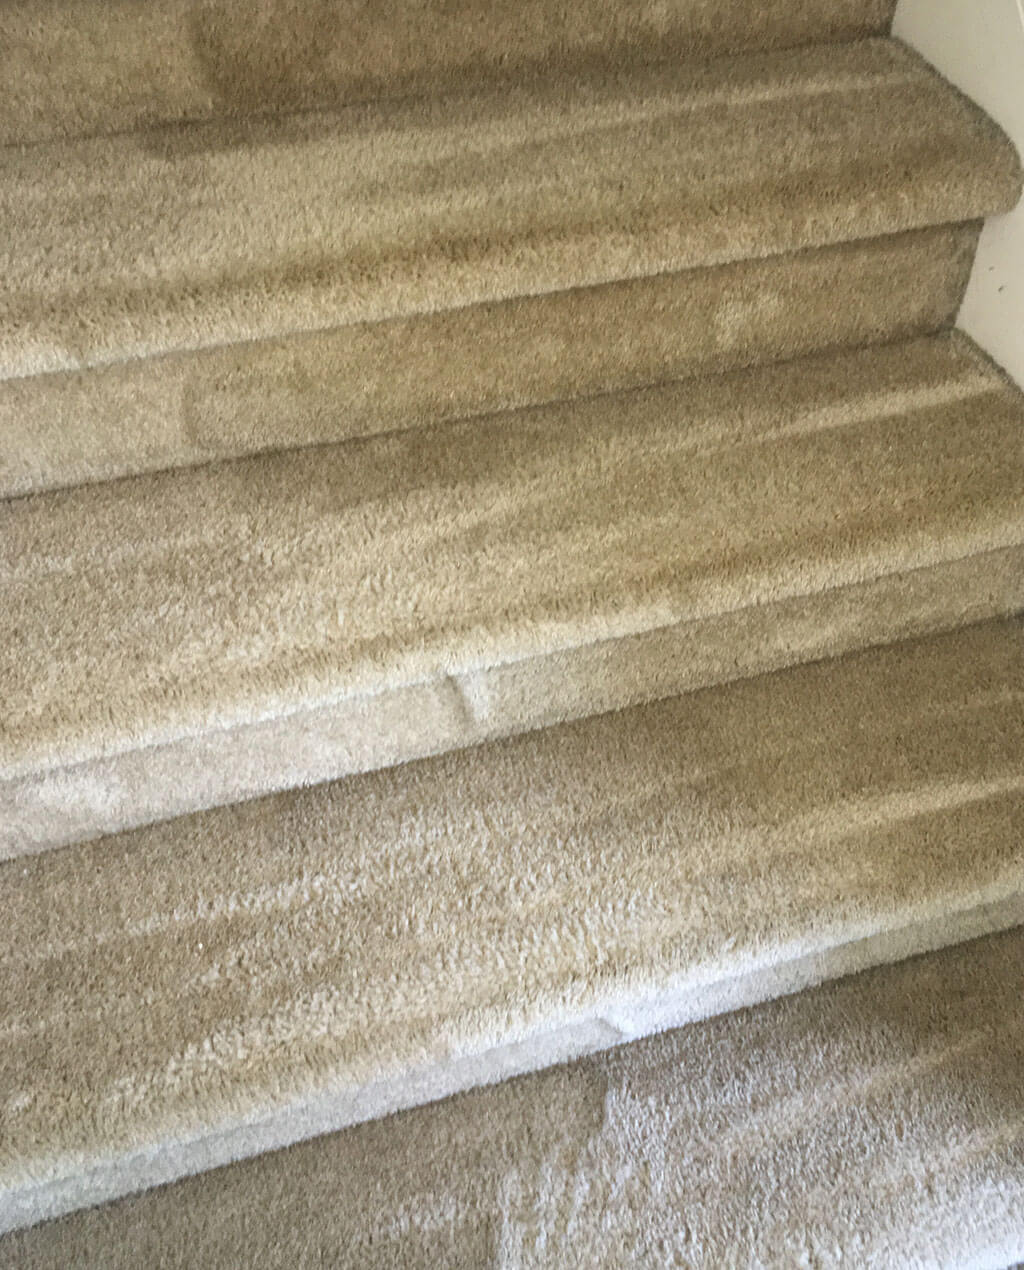 D and d carpet cleaning